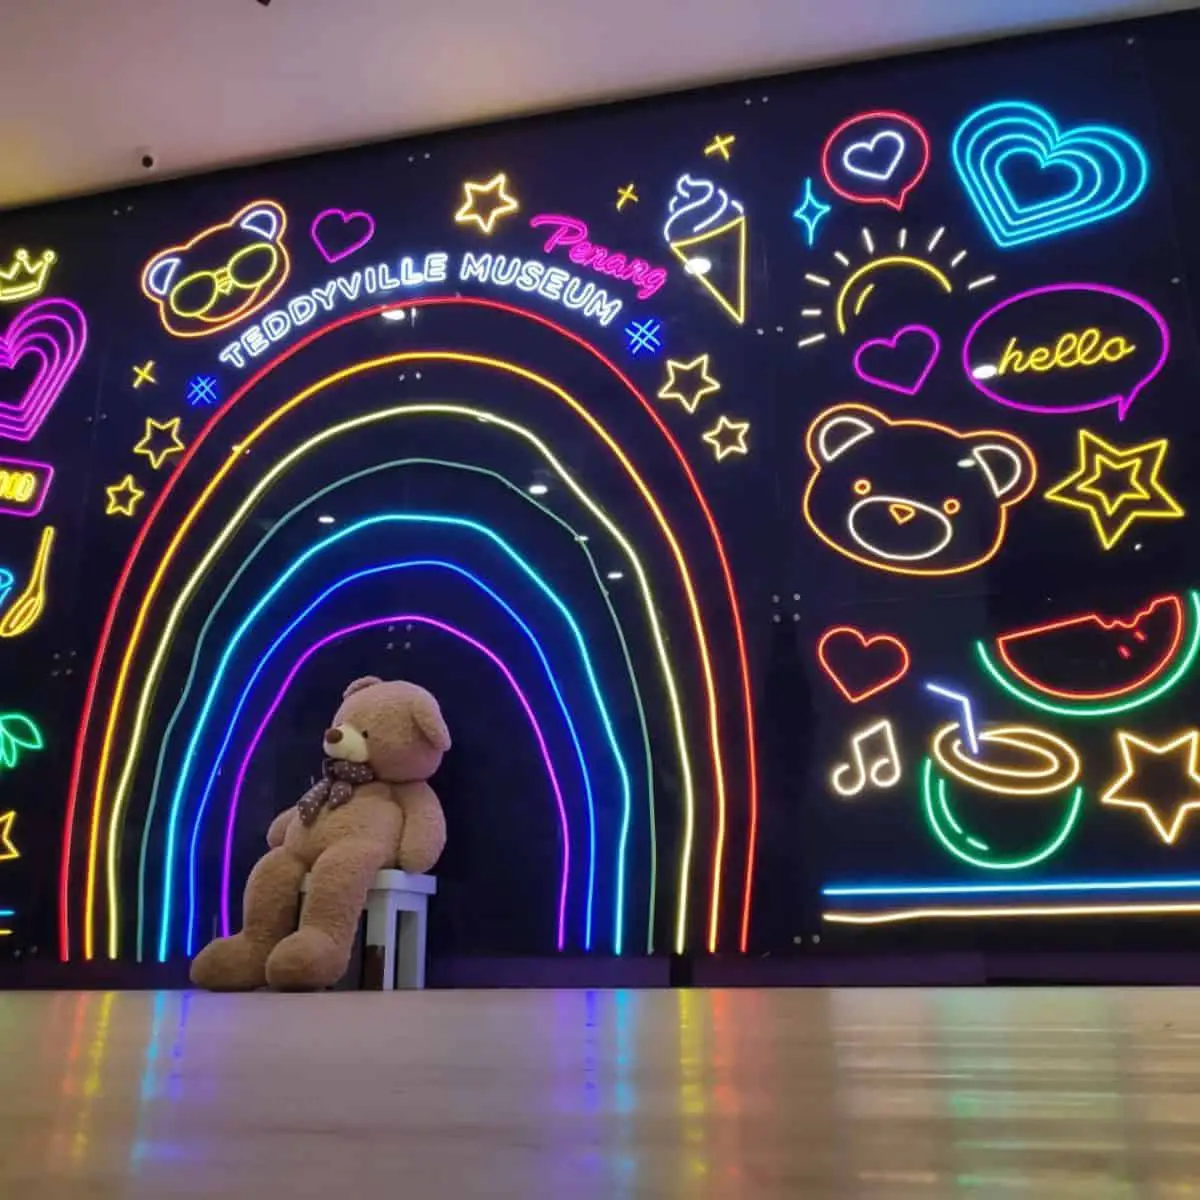 A human size Teddyville Museum’s teddy bear sitting in a chair with colourful lights as a backdrop